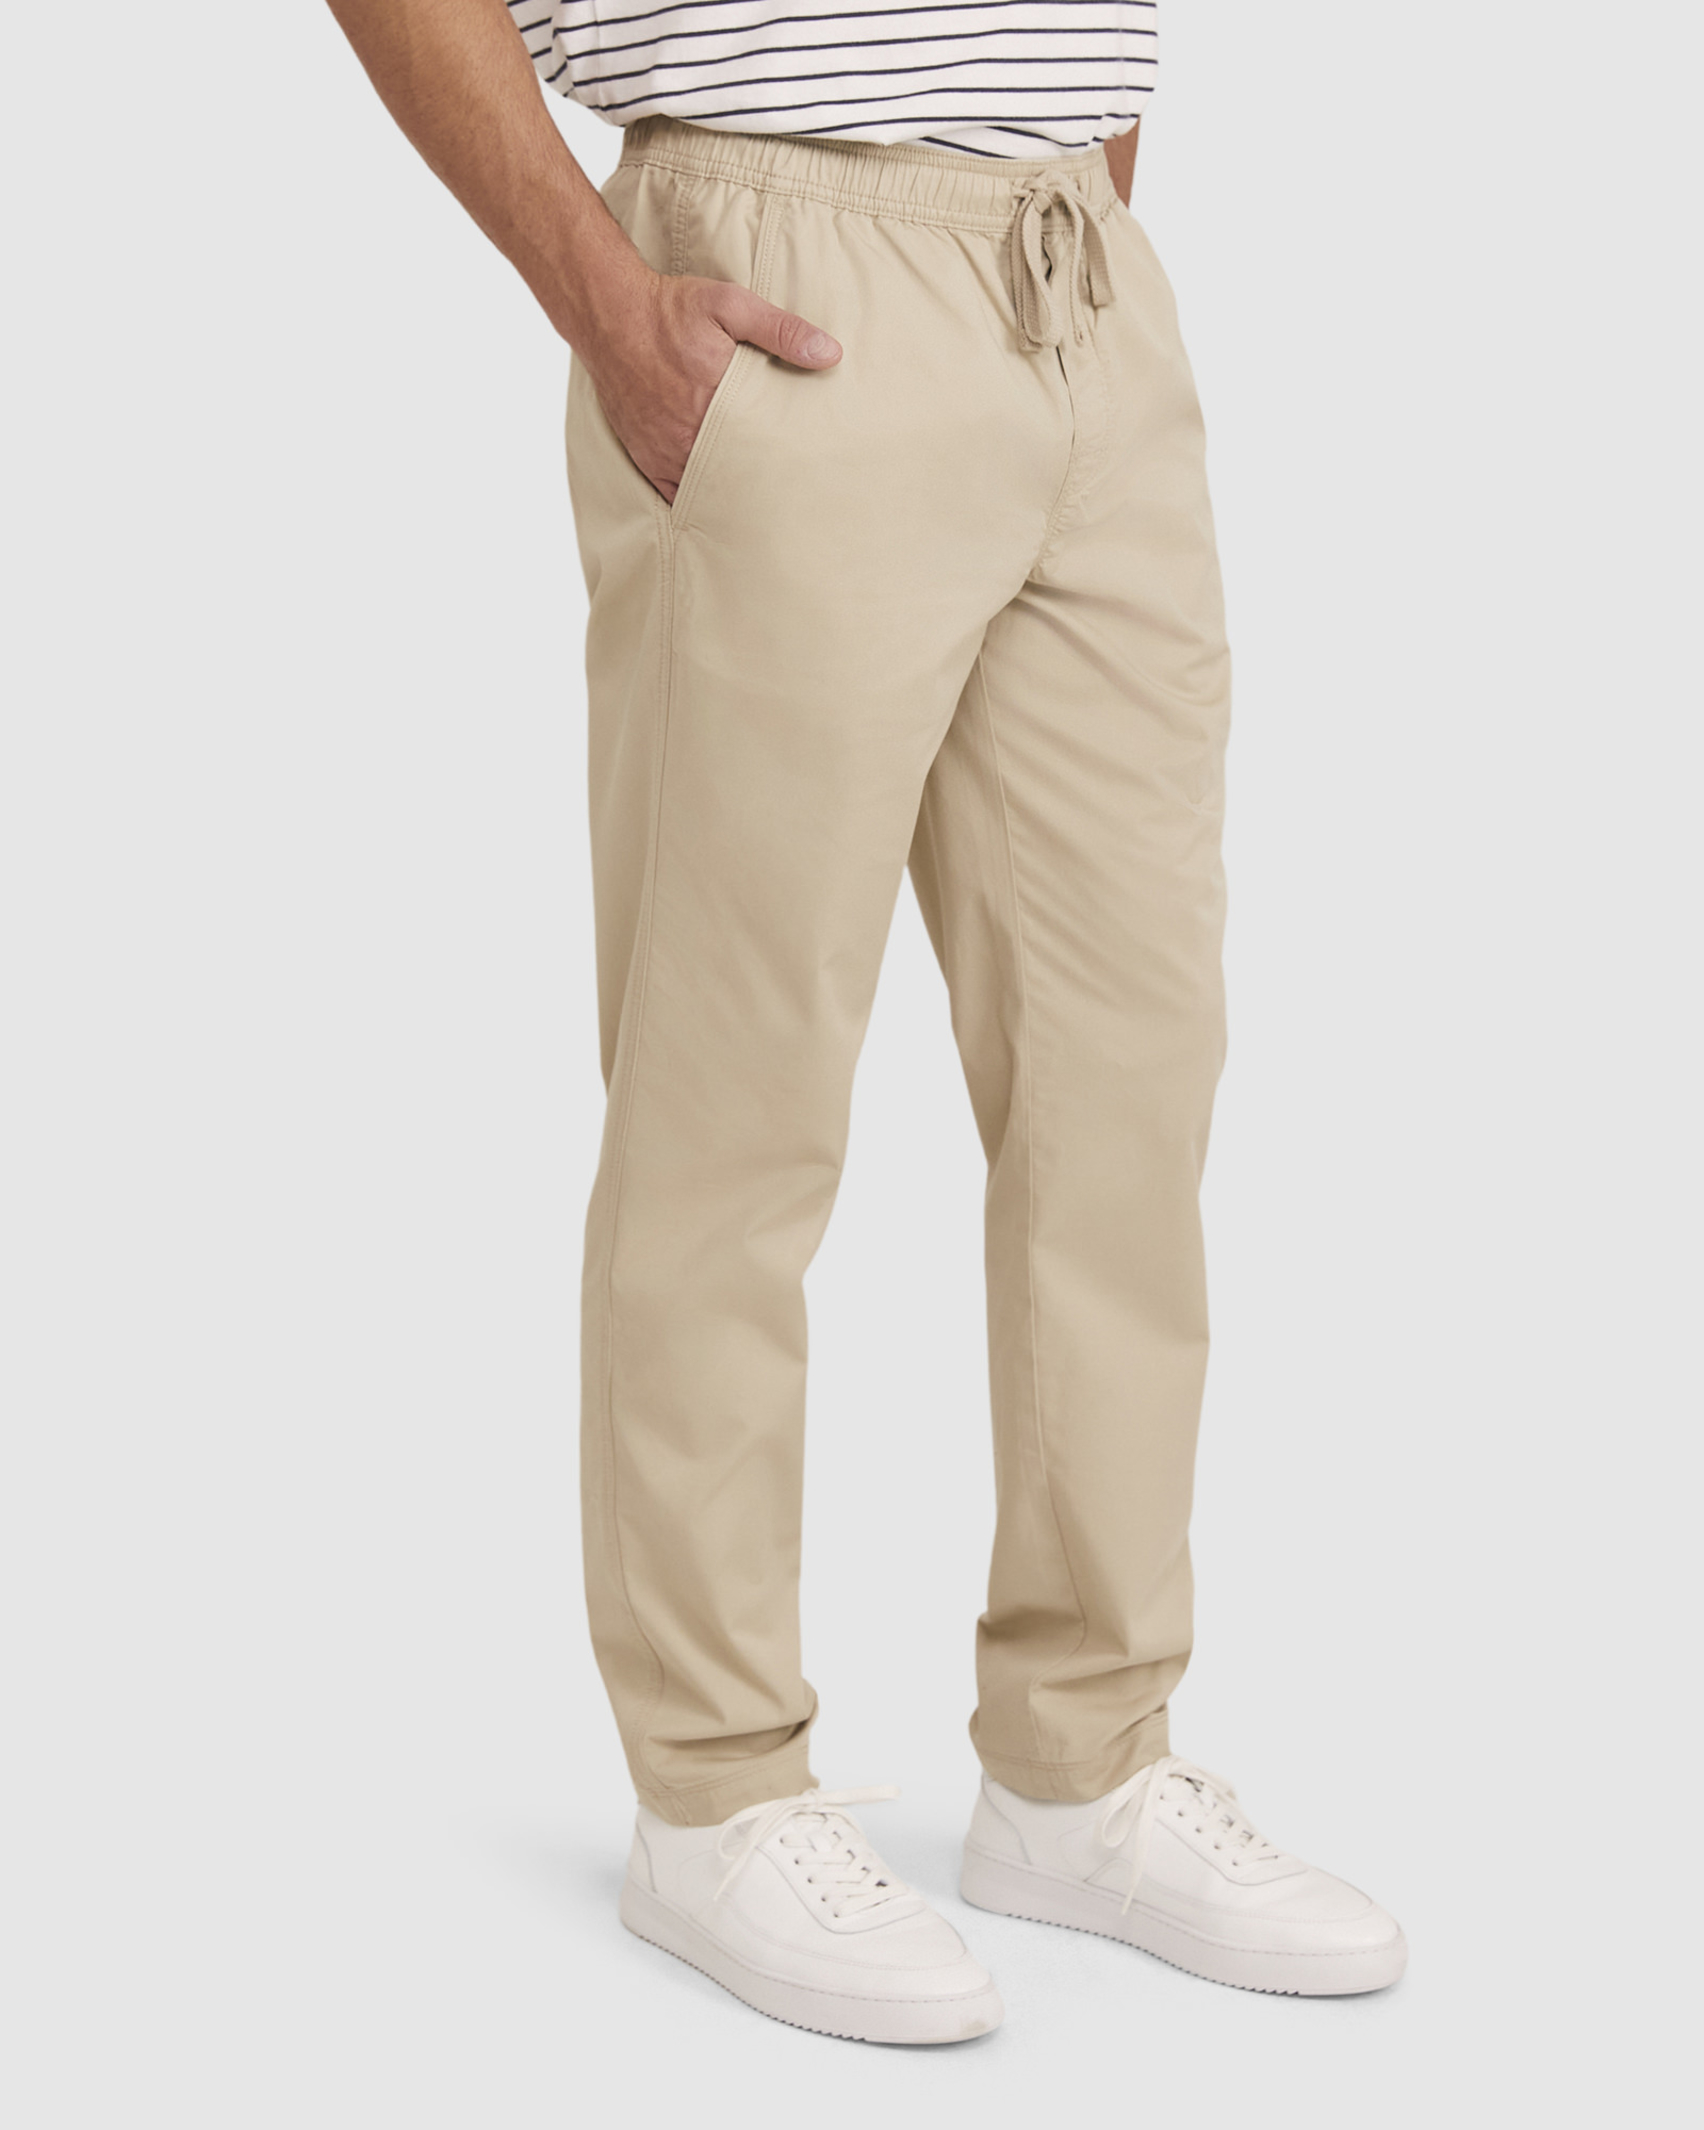 Shen Pant in SAND